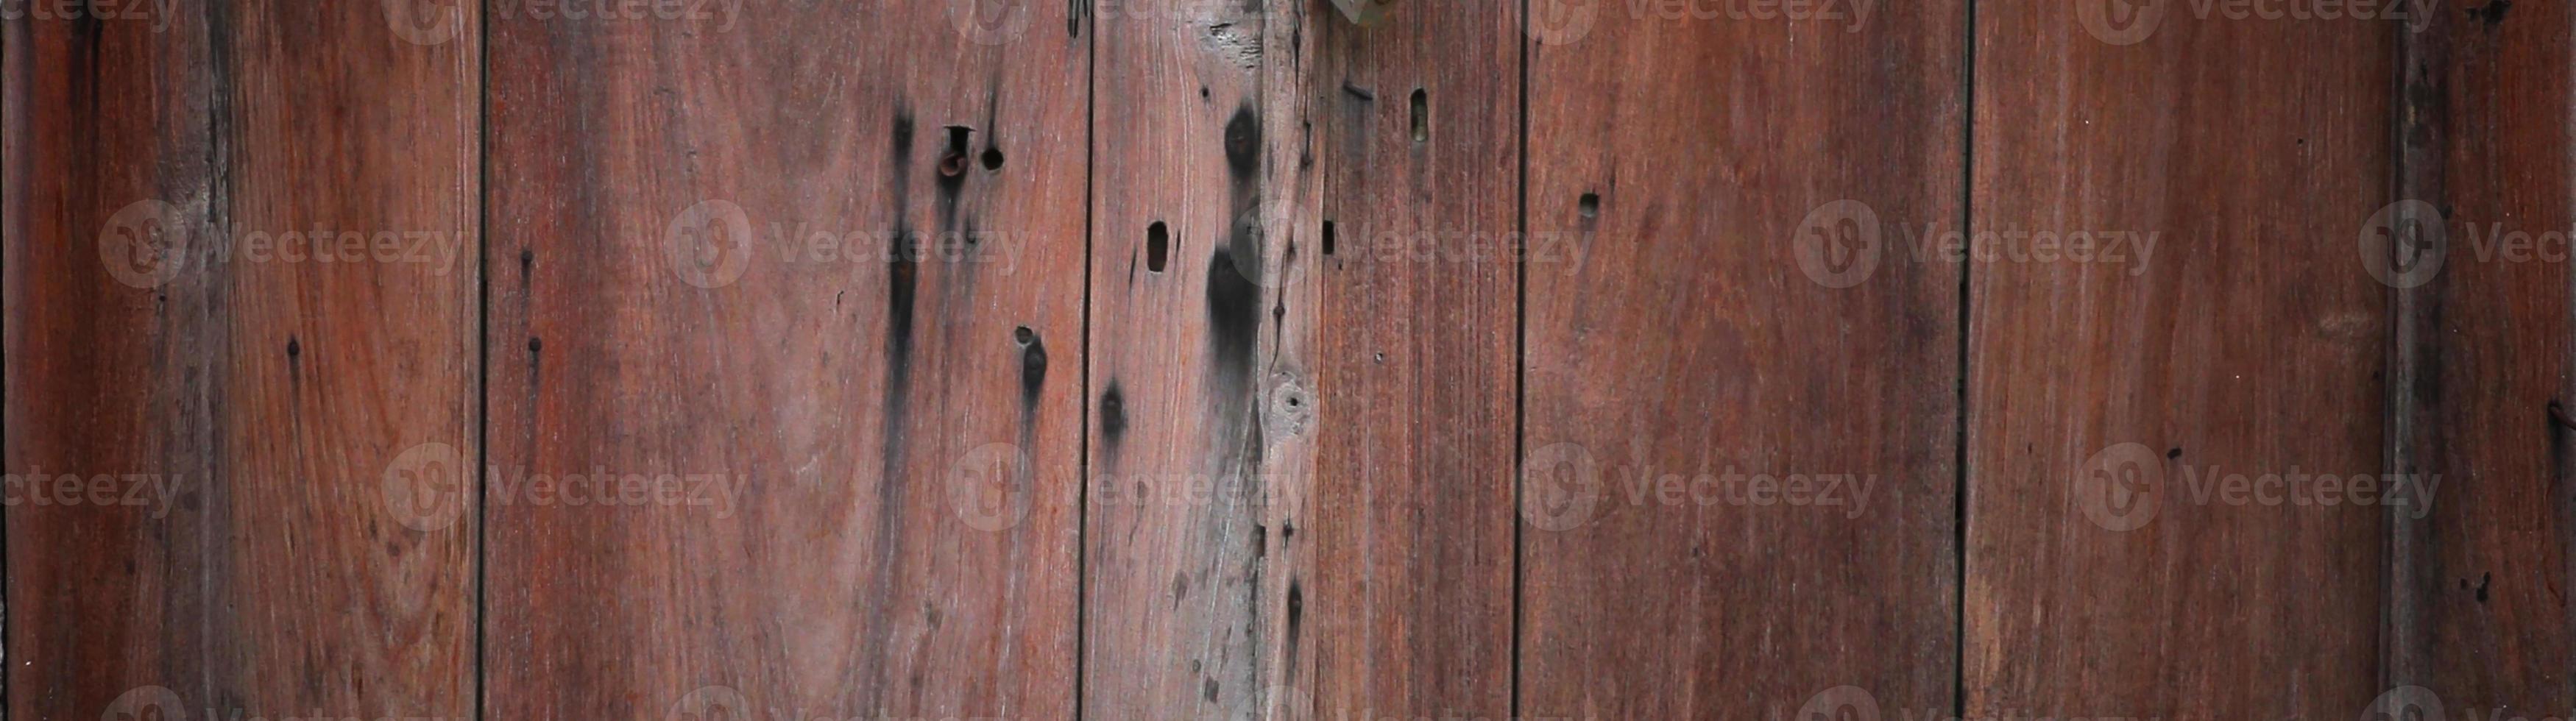 Panoramic Old grunge textured wooden background. wooden background texture surface. wood planks background photo